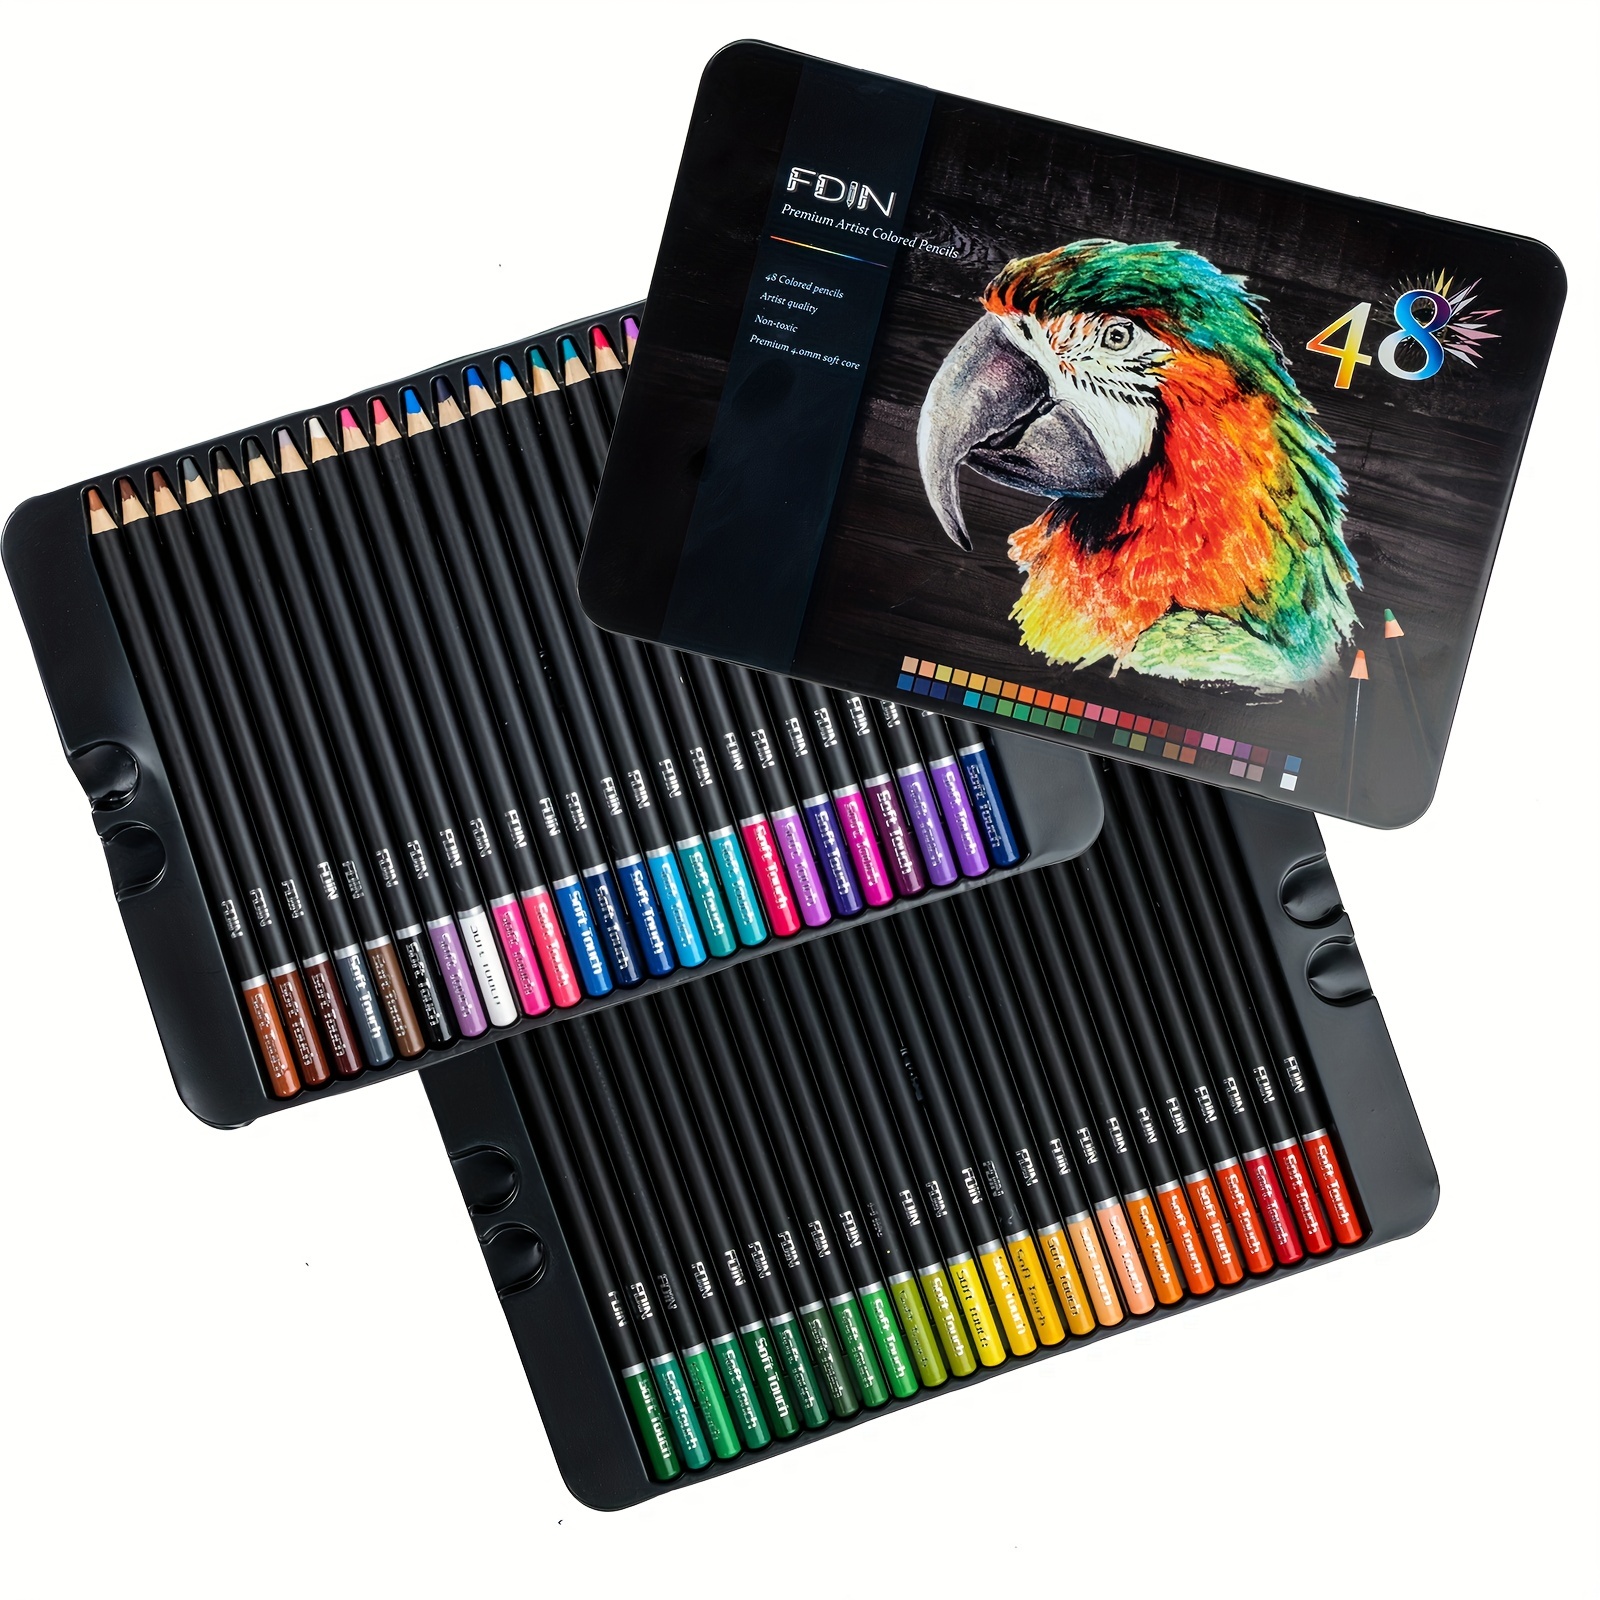 Best Gift 182 Pieces Color Pencil and Sketch Pencils Set for